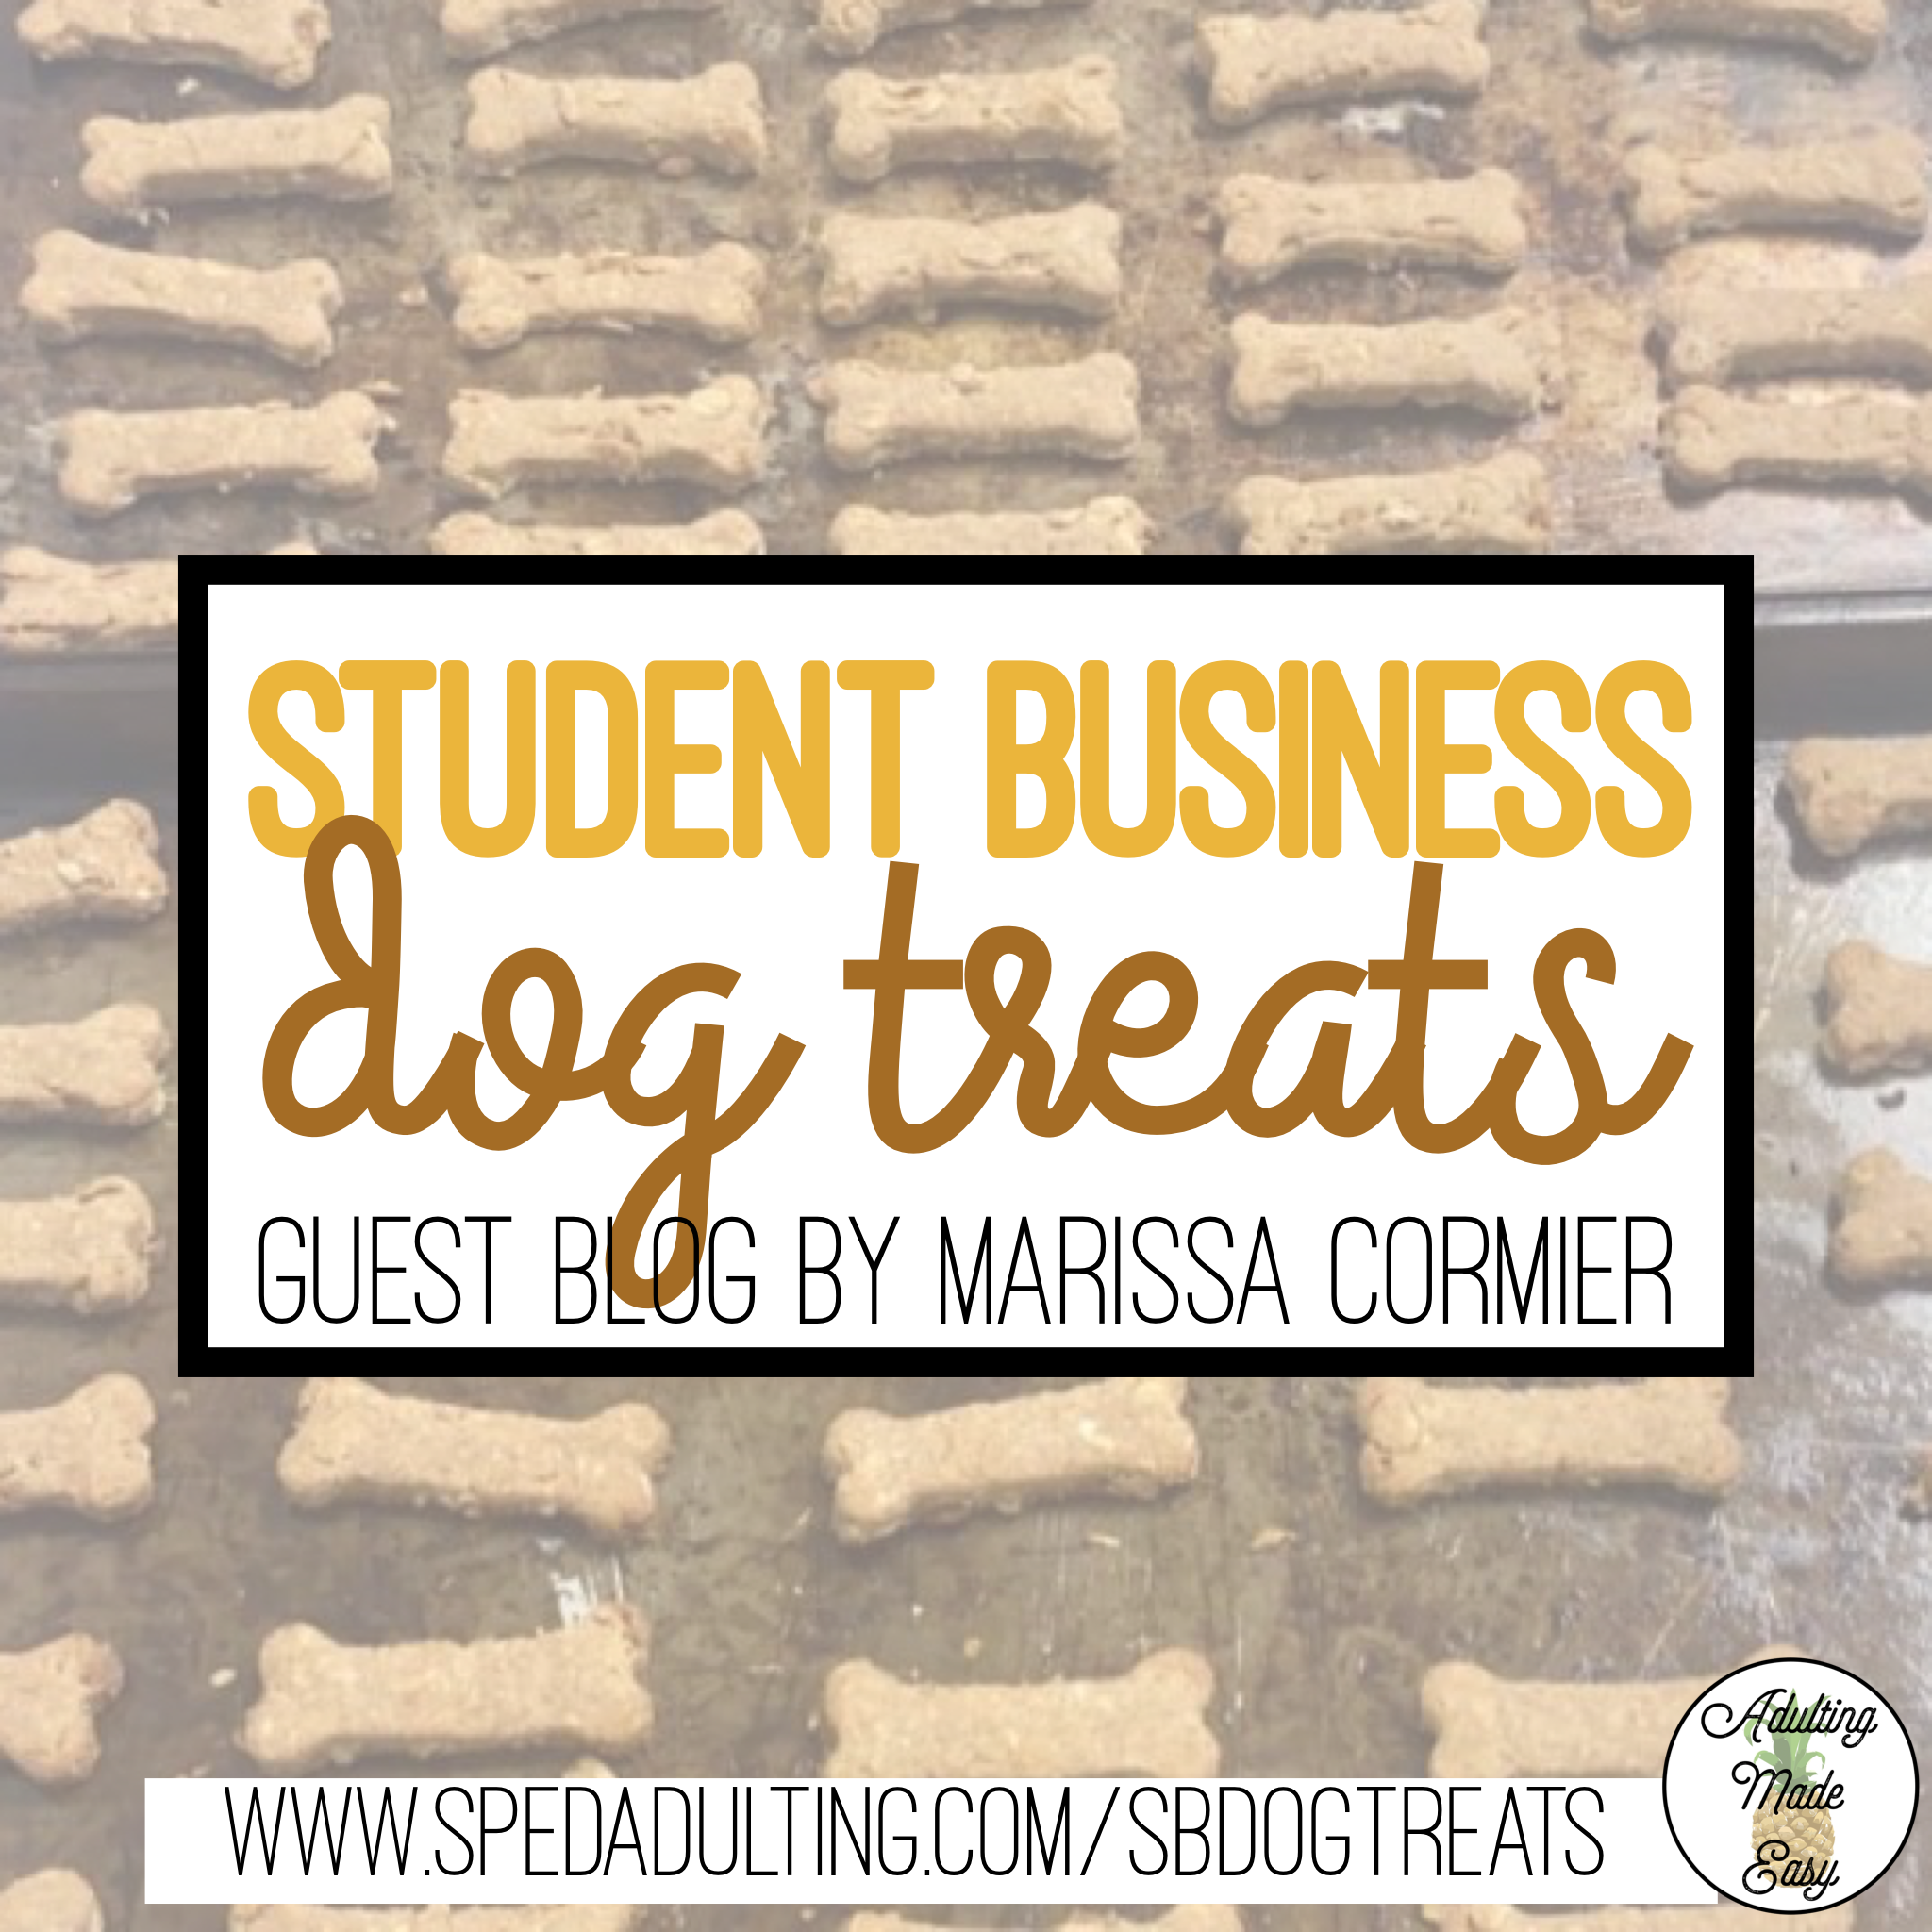 BLOG: Special Education Student Business Dog Treats